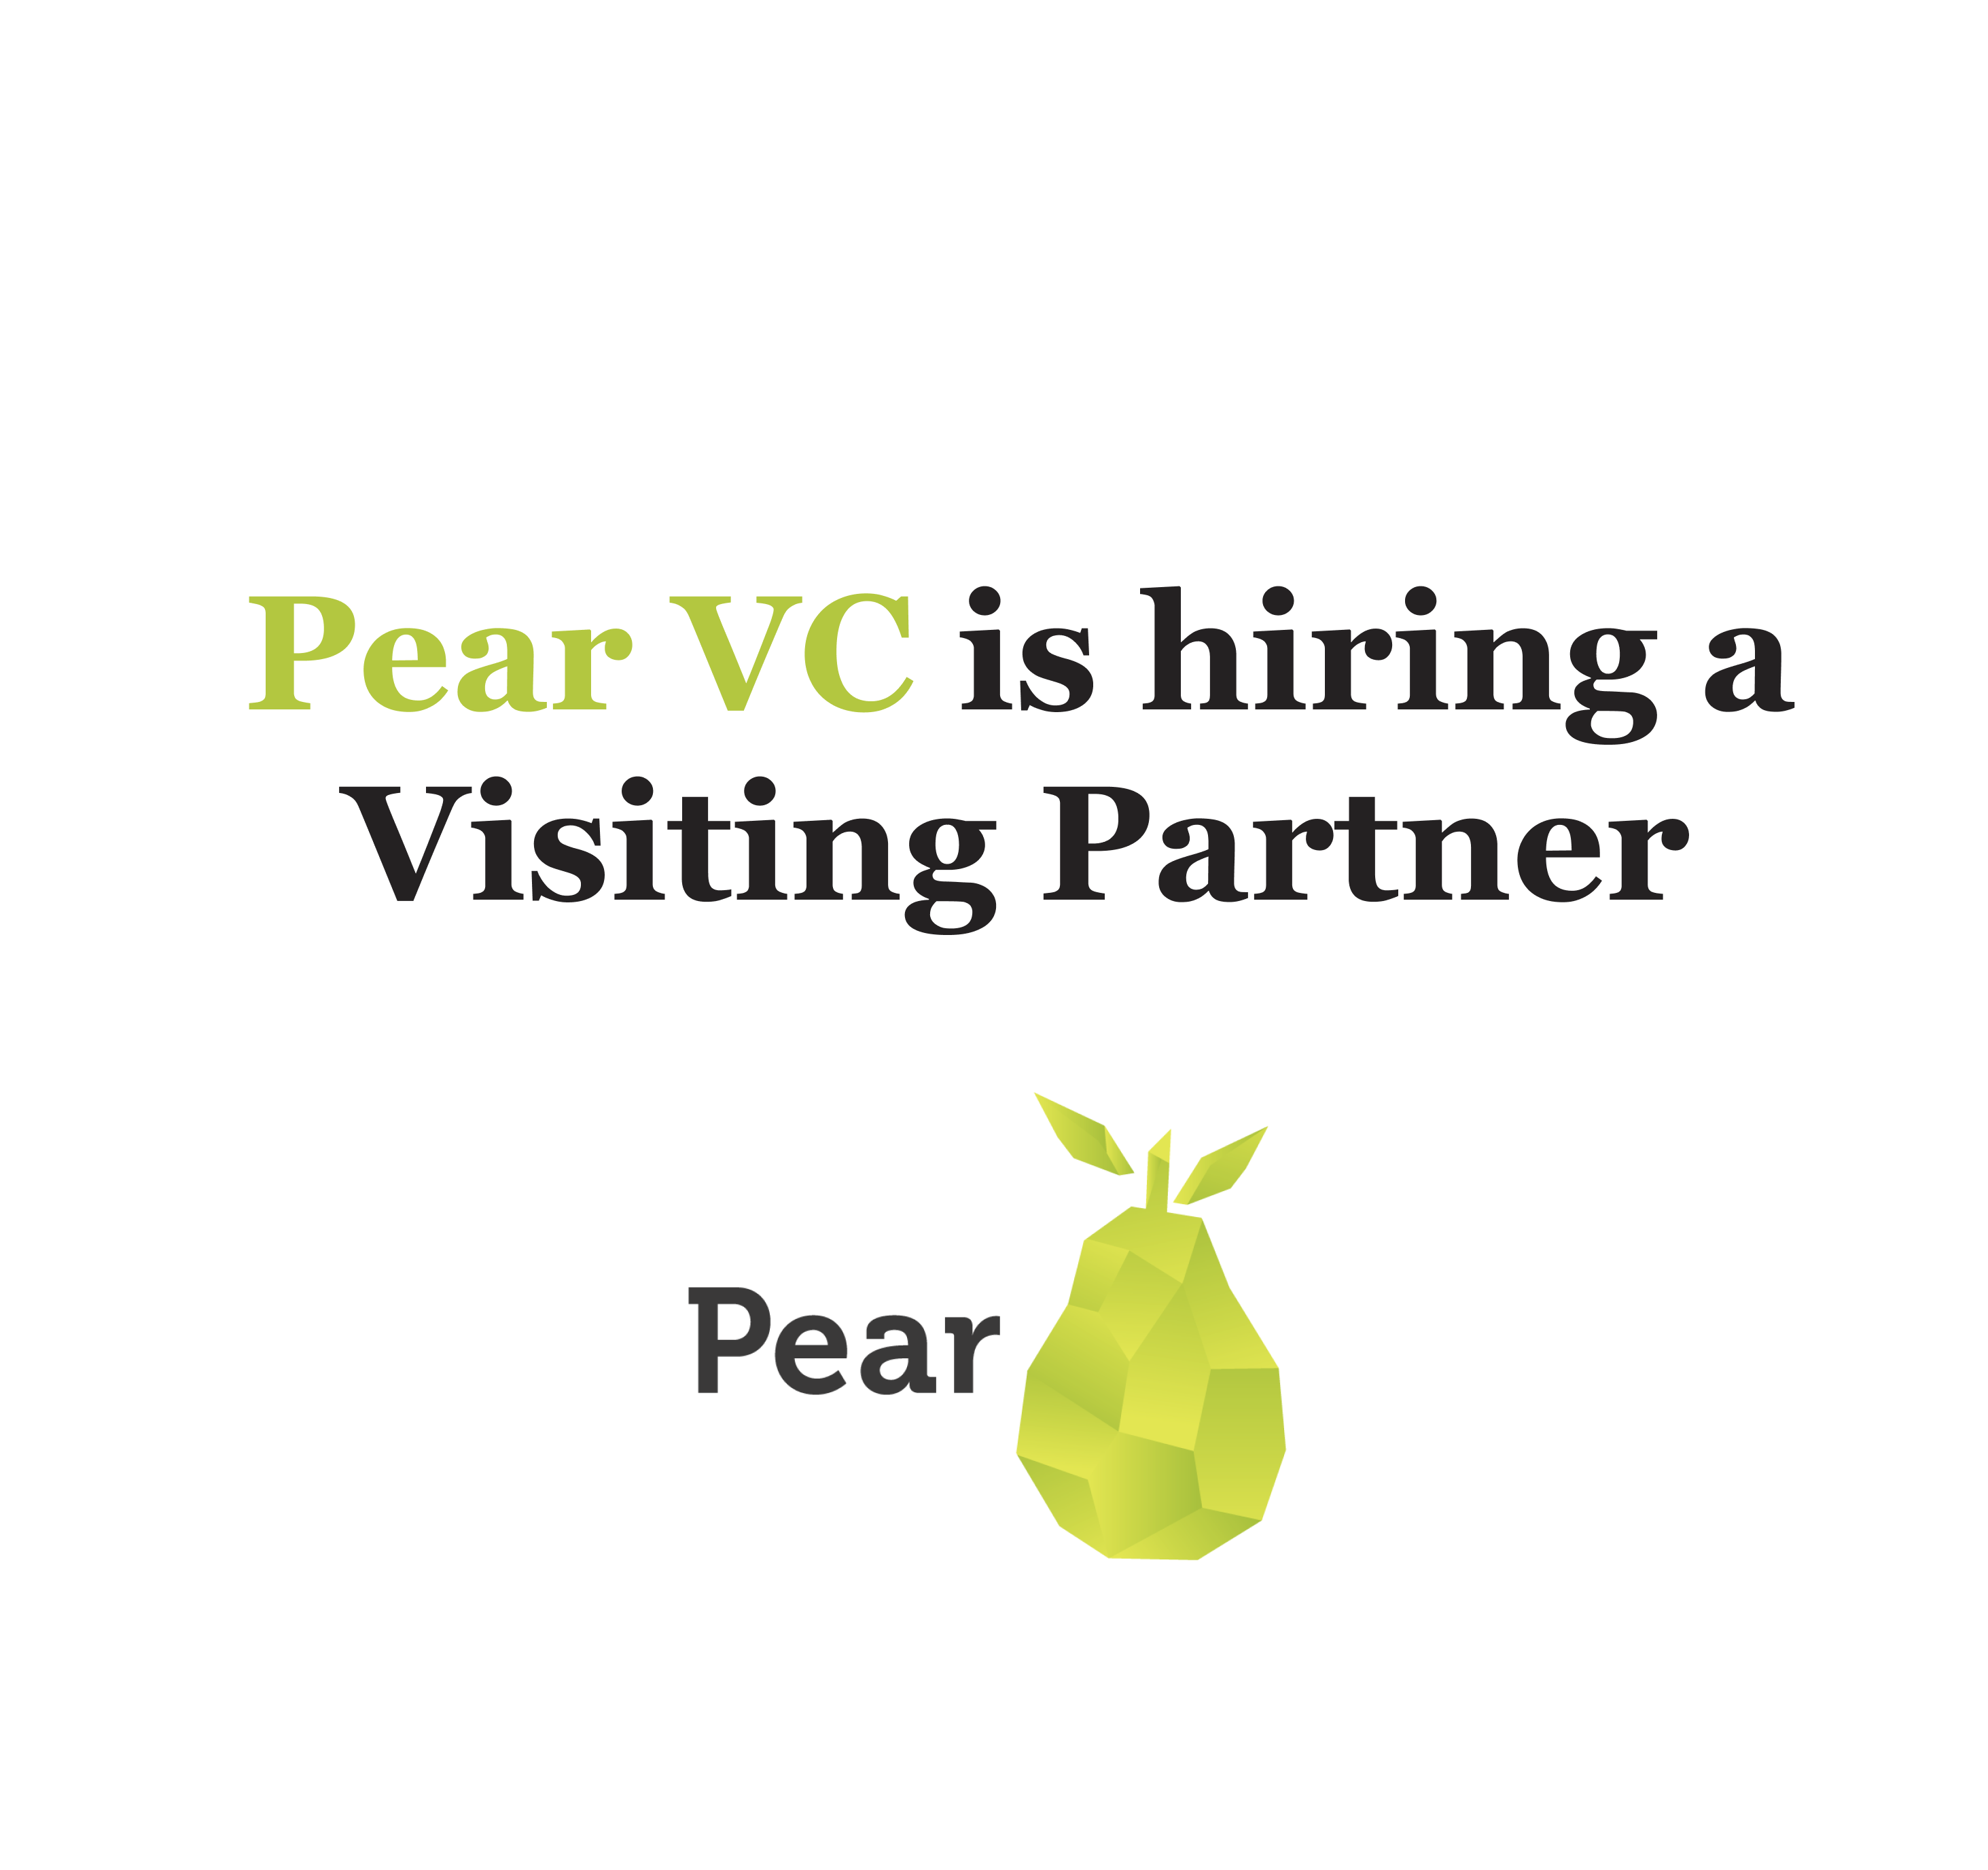 resources Come join Pear as a Visiting Partner!